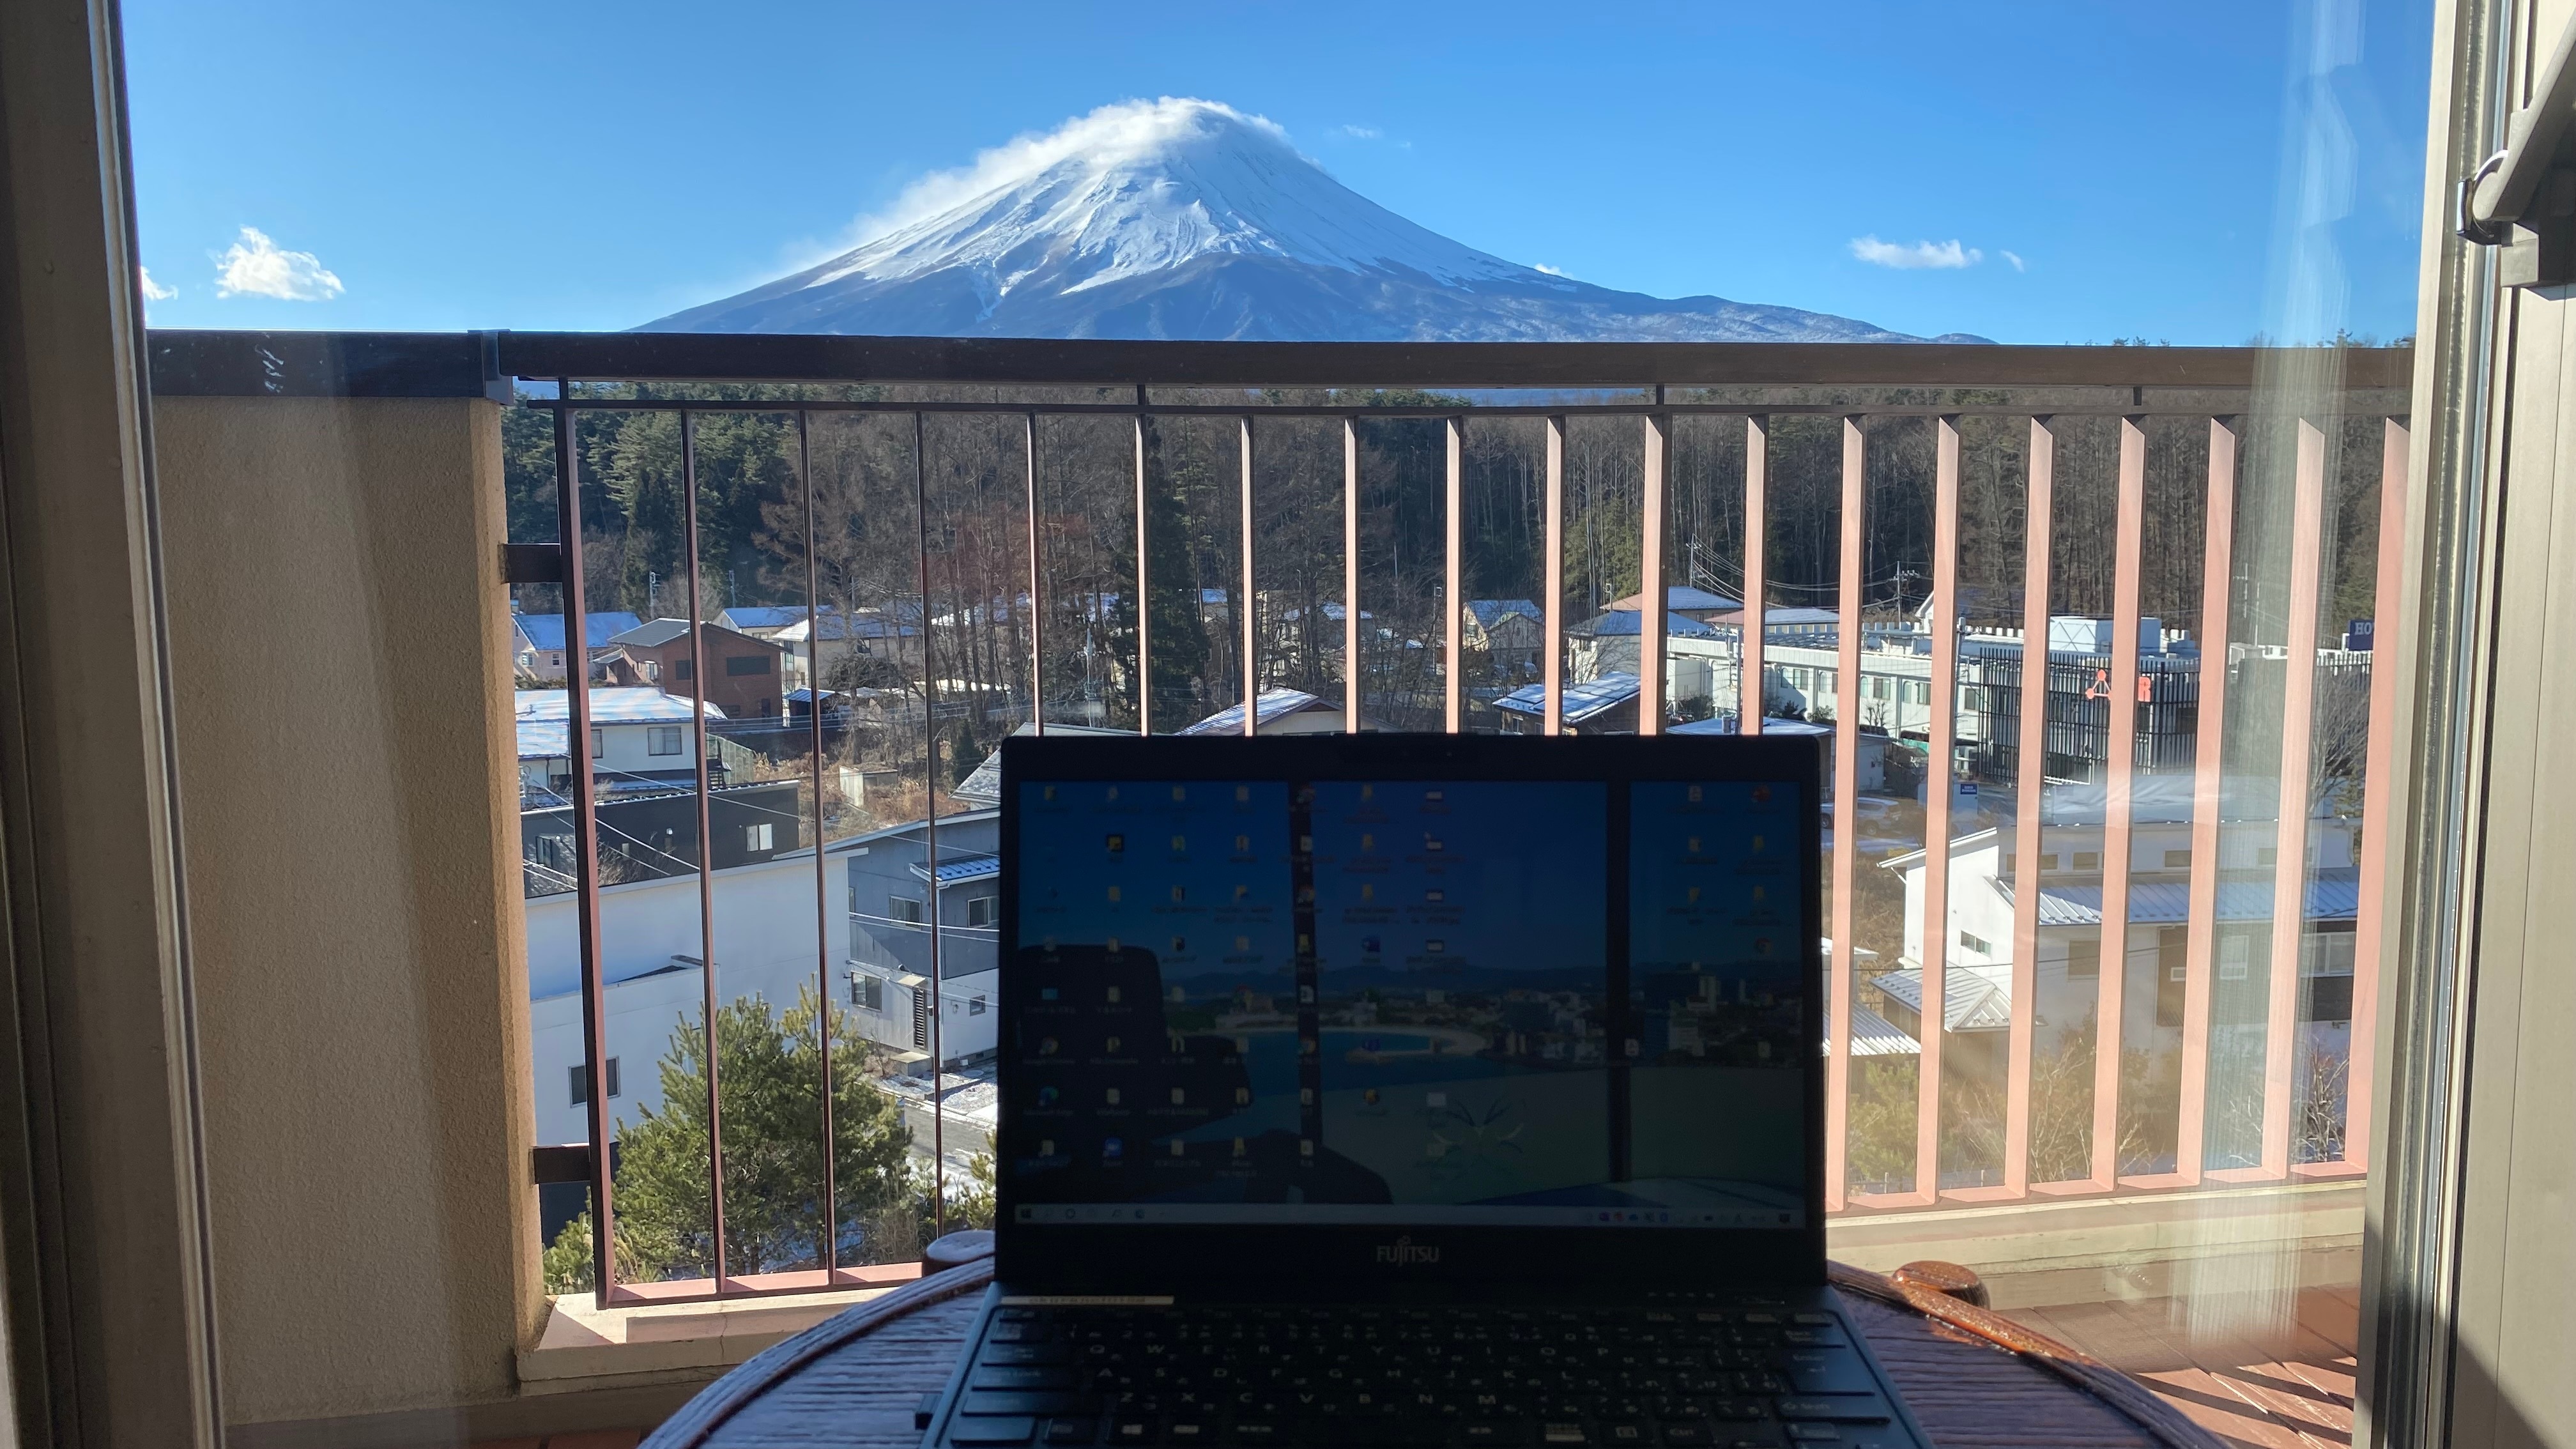 [View from the room] Workday while looking at Mt. Fuji